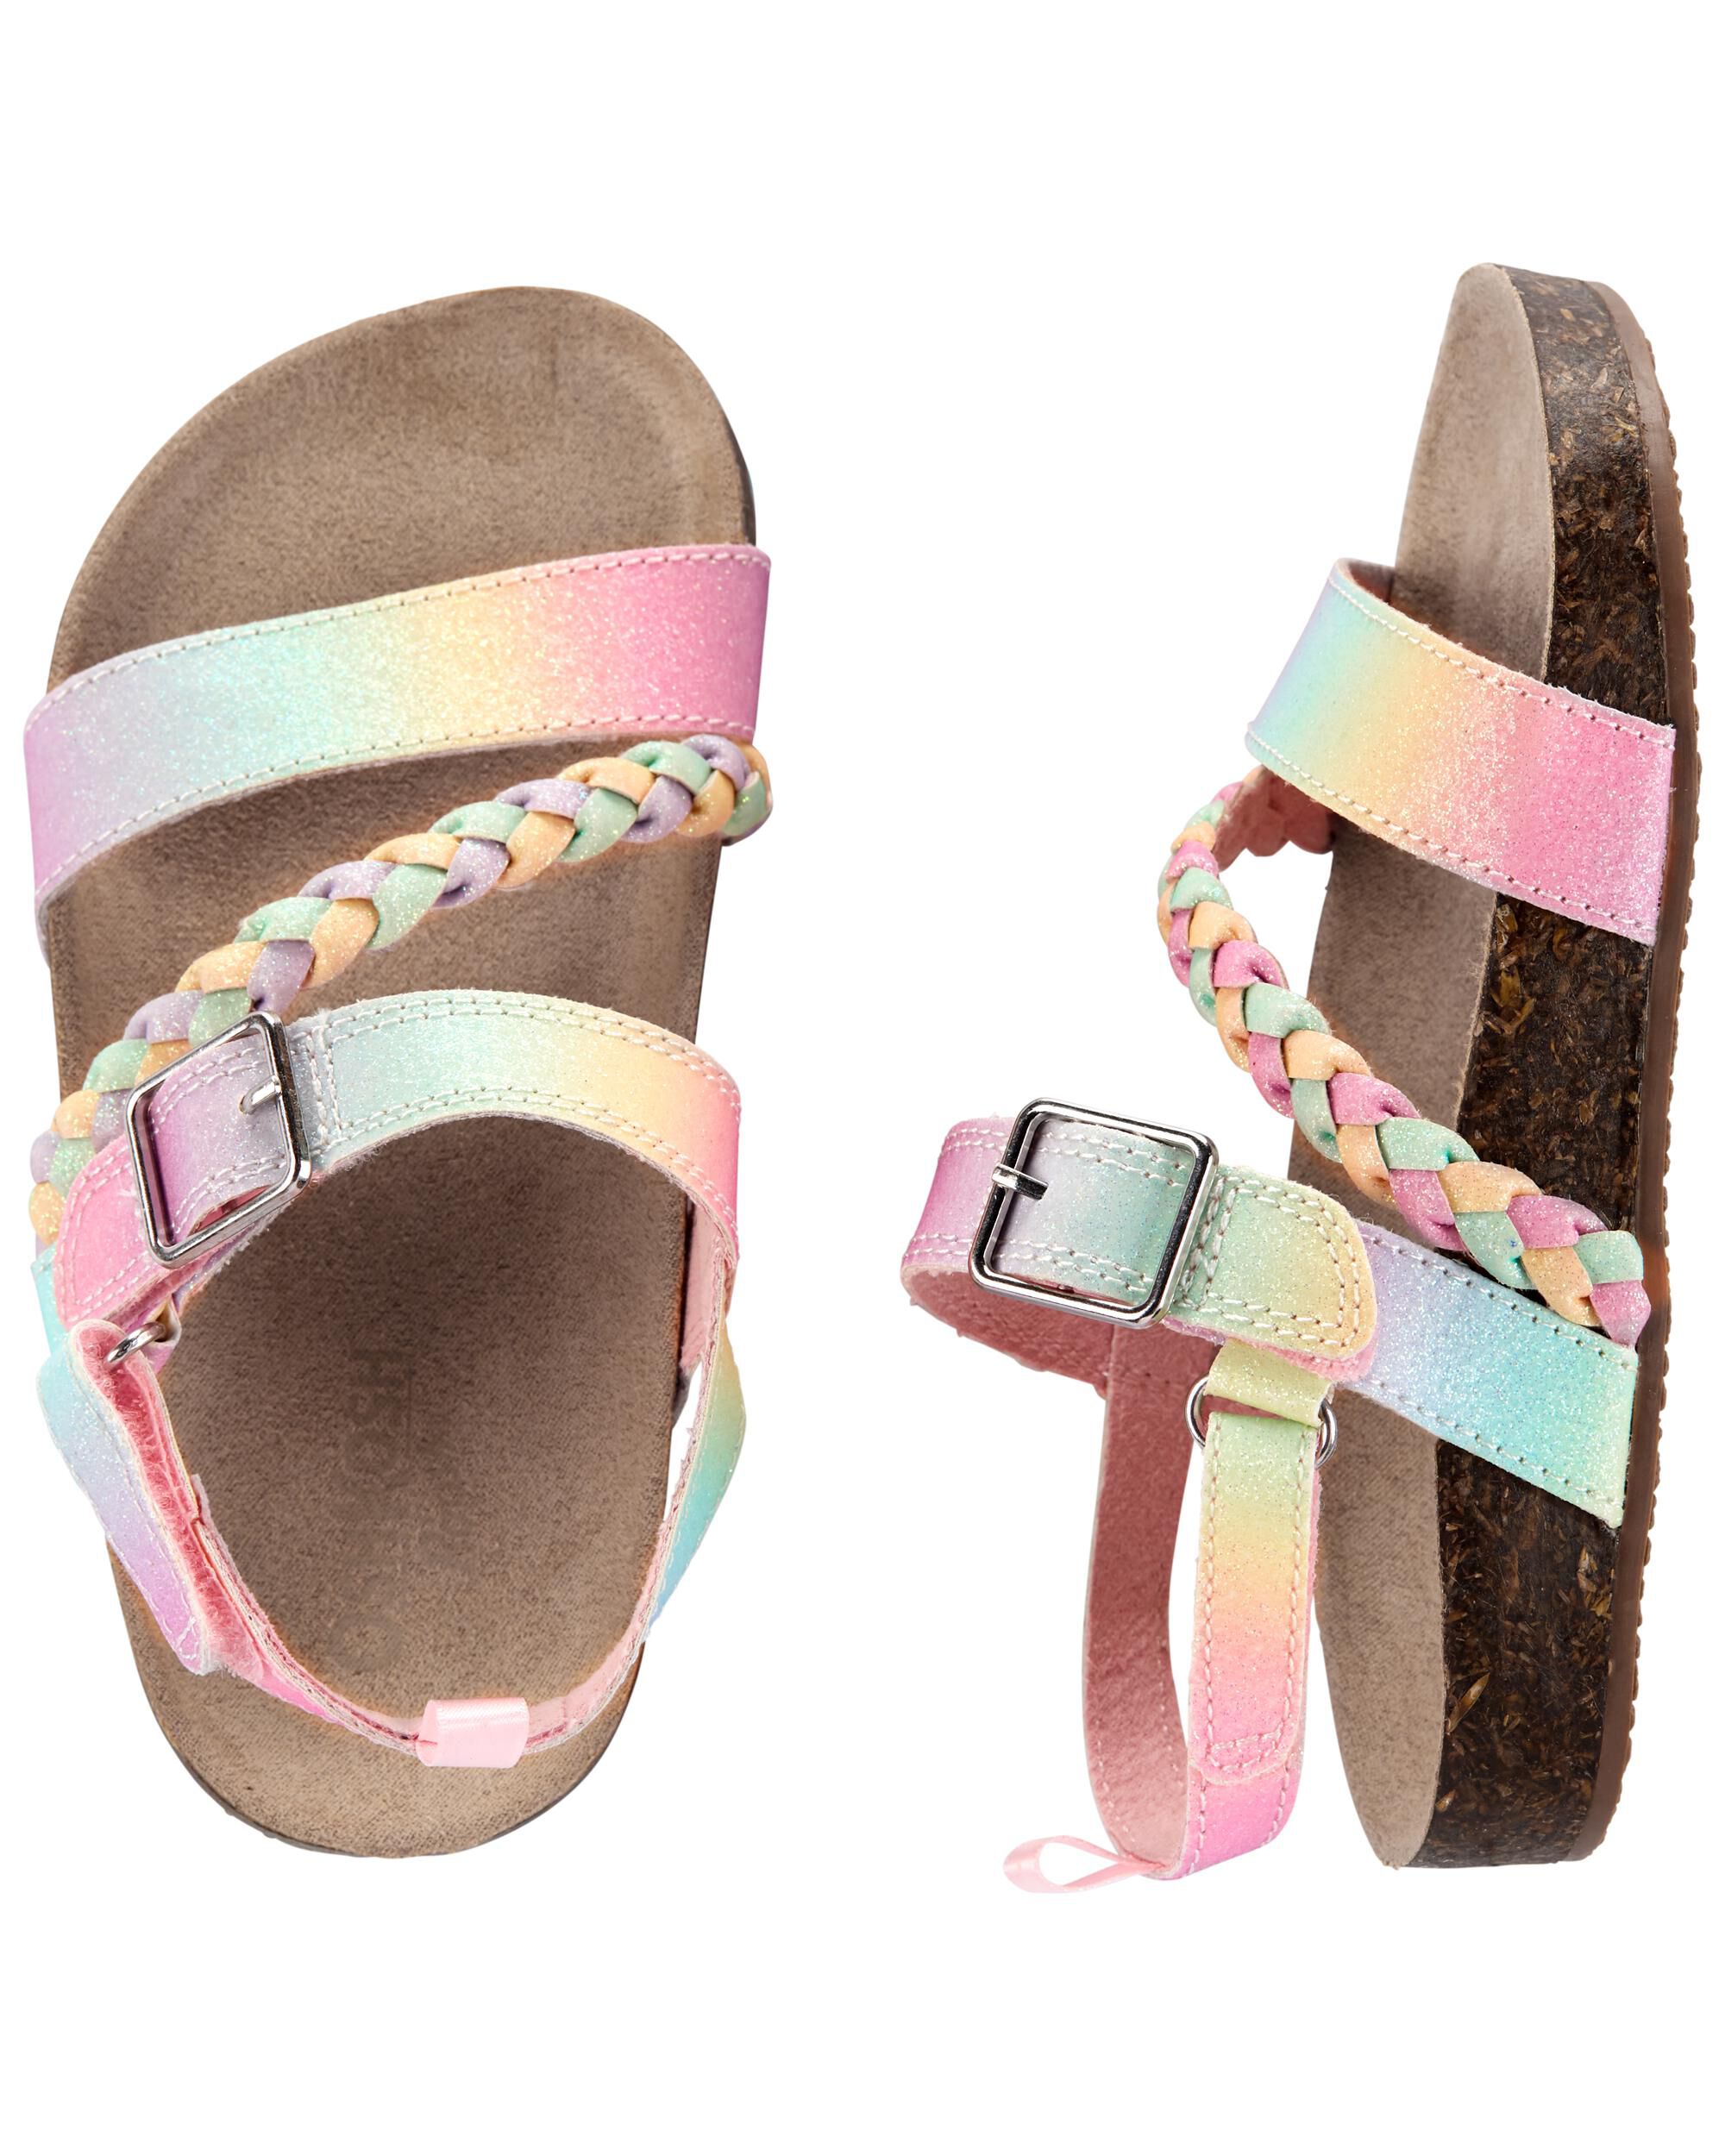 Details about   New Carter's Strappy sandals Shoes girls Rainbow 1,2 